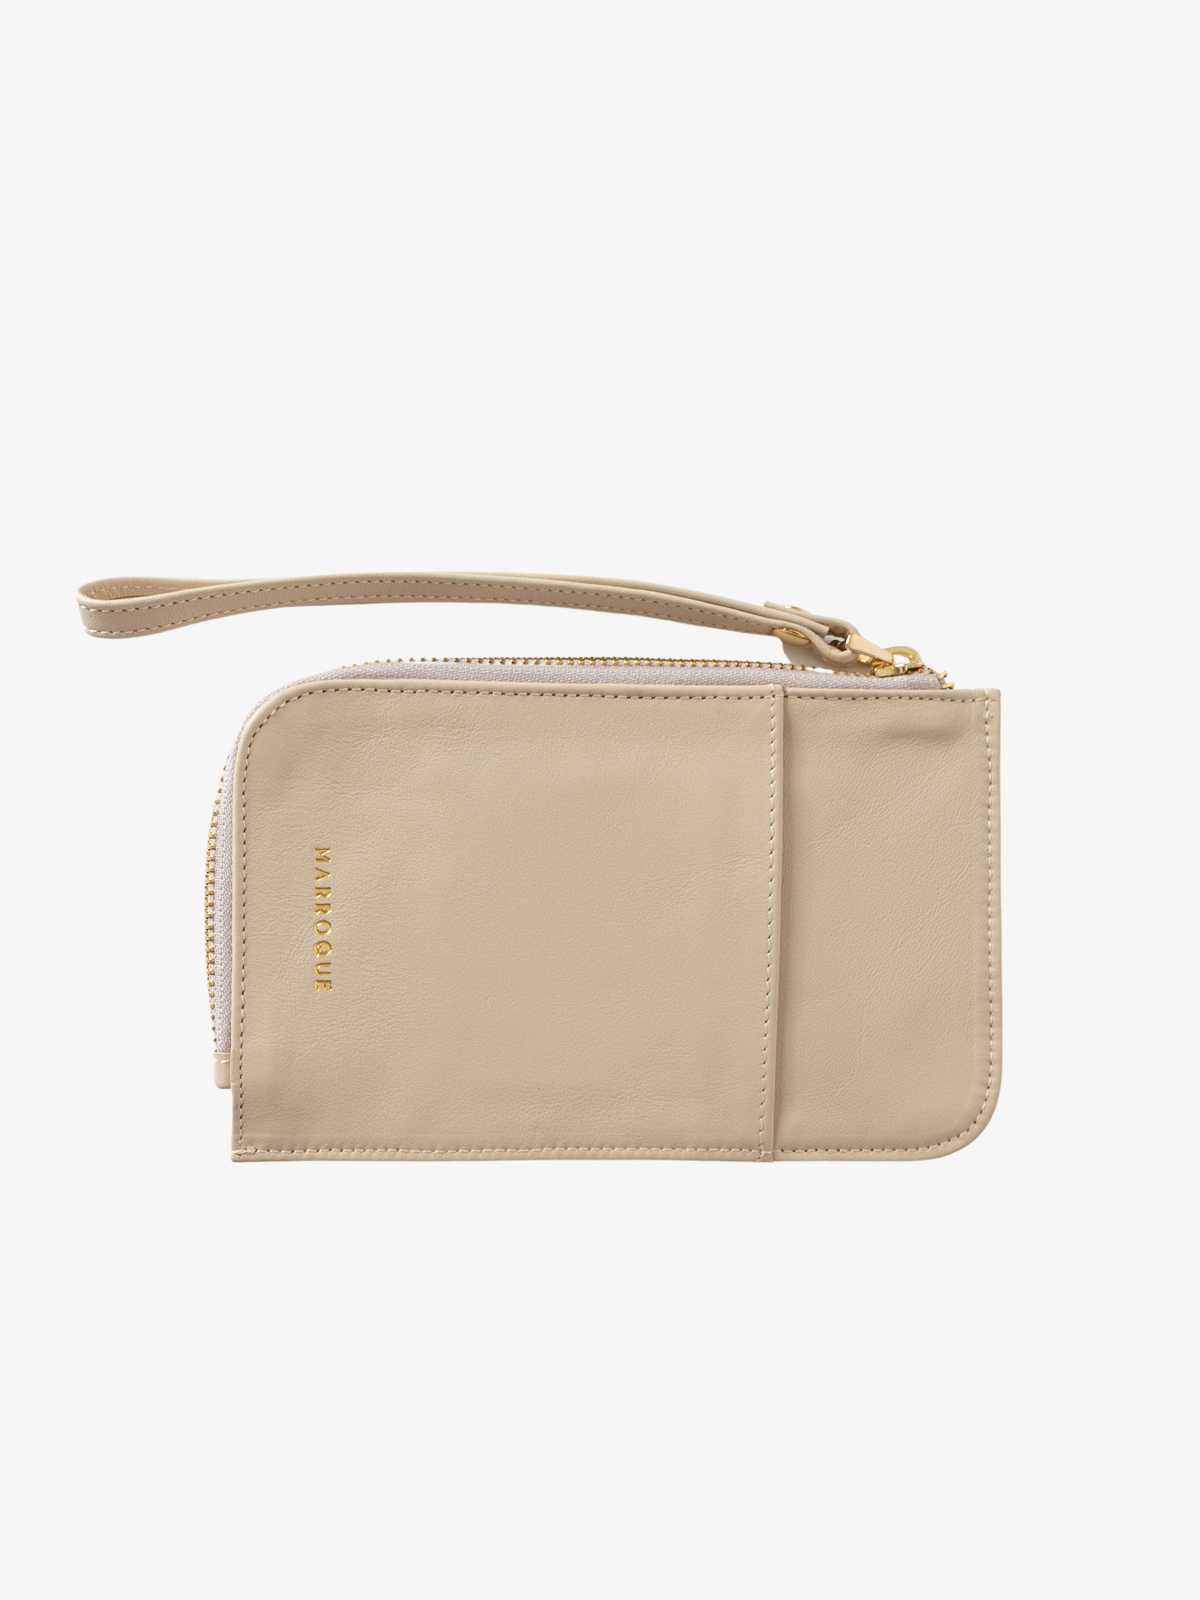 marroque upcycled wallet in offwhite